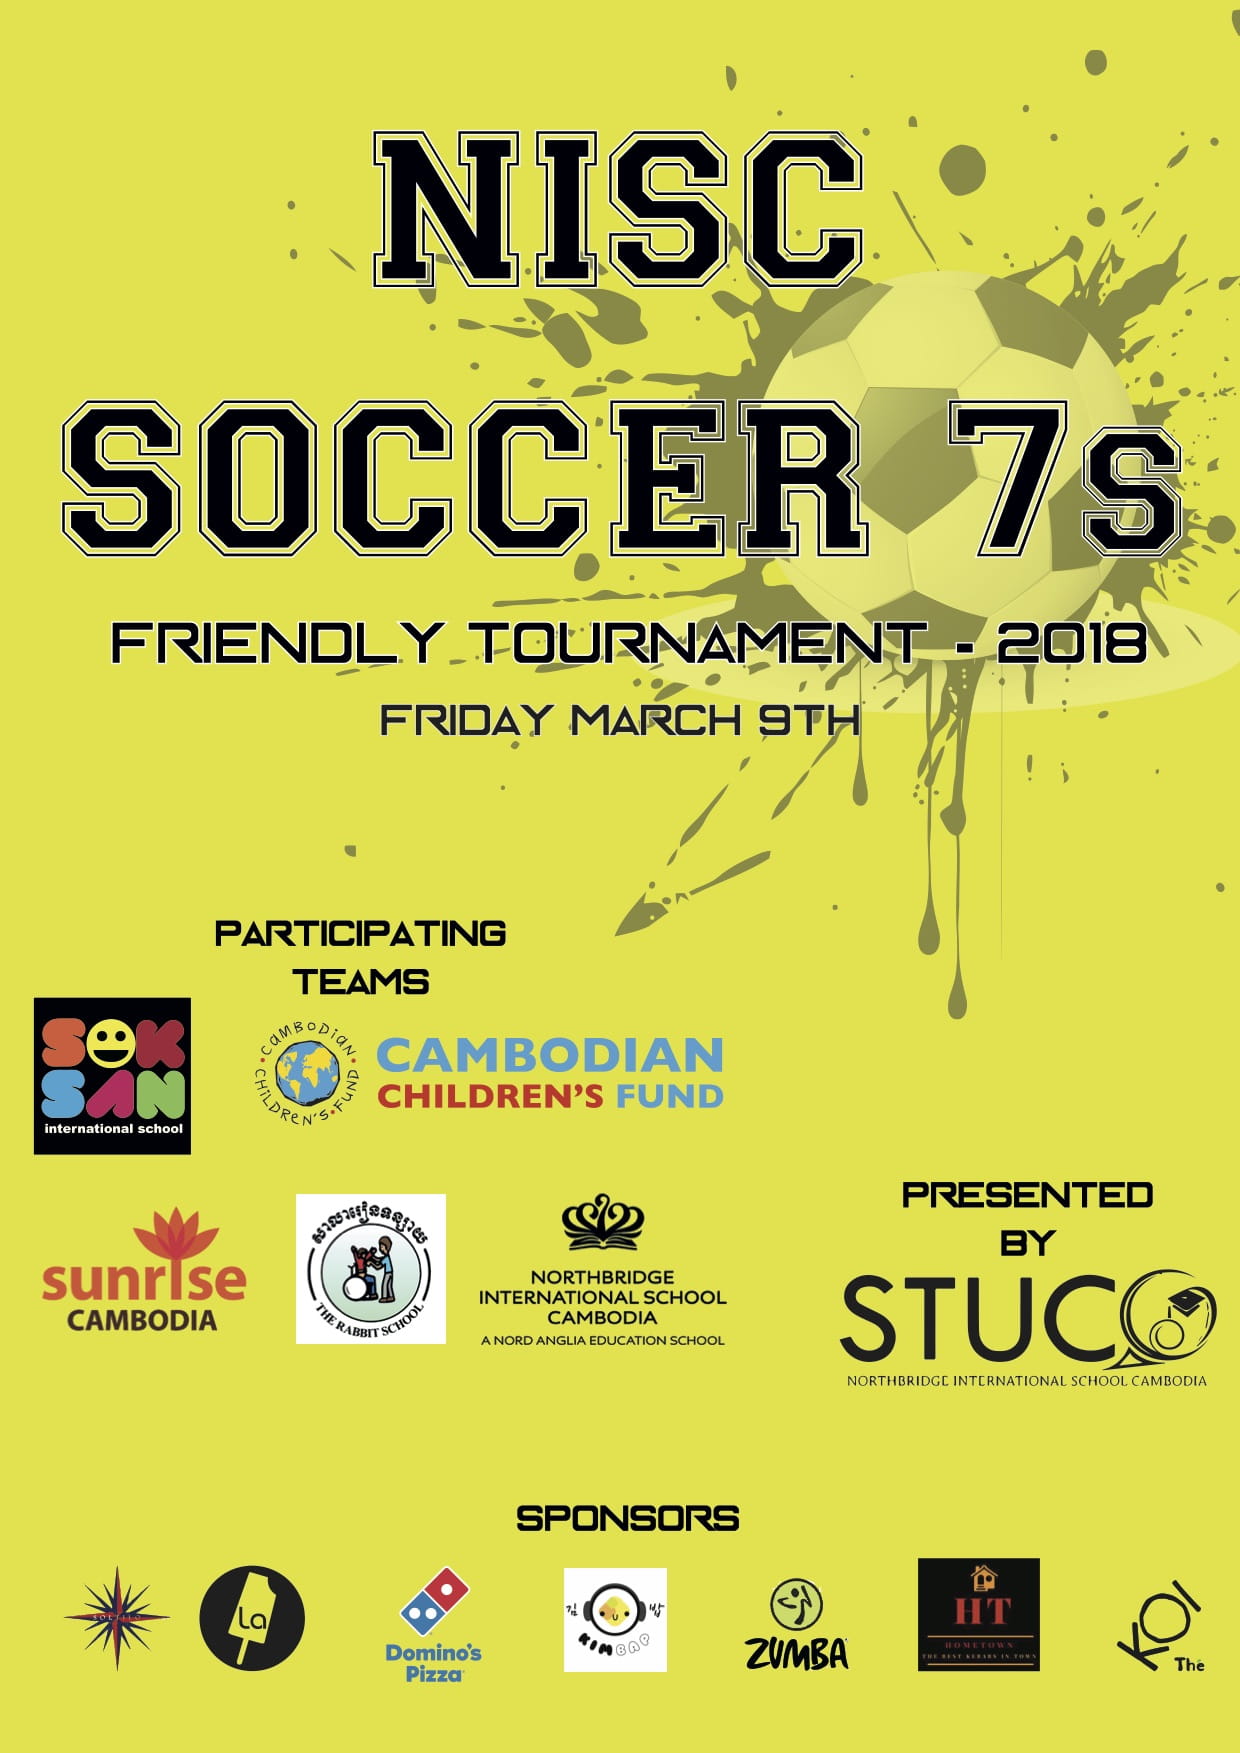 All welcome to the NISC Soccer 7s on 9 March - all-welcome-to-the-nisc-soccer-7s-on-9-march